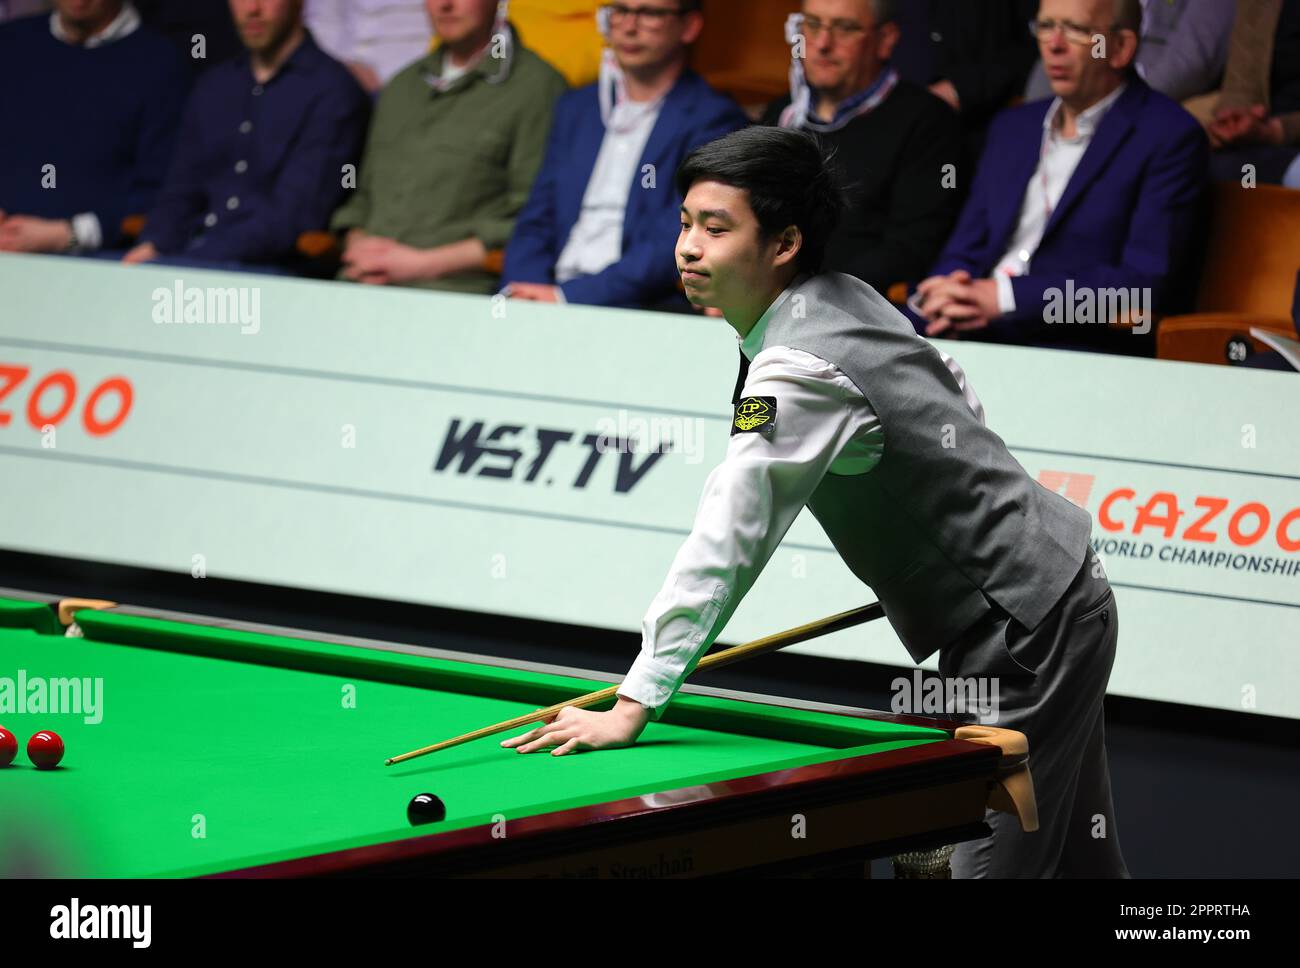 Si Jiahui during his match against Shaun Murphy during day six of the Cazoo World Snooker Championship at the Crucible Theatre, Sheffield